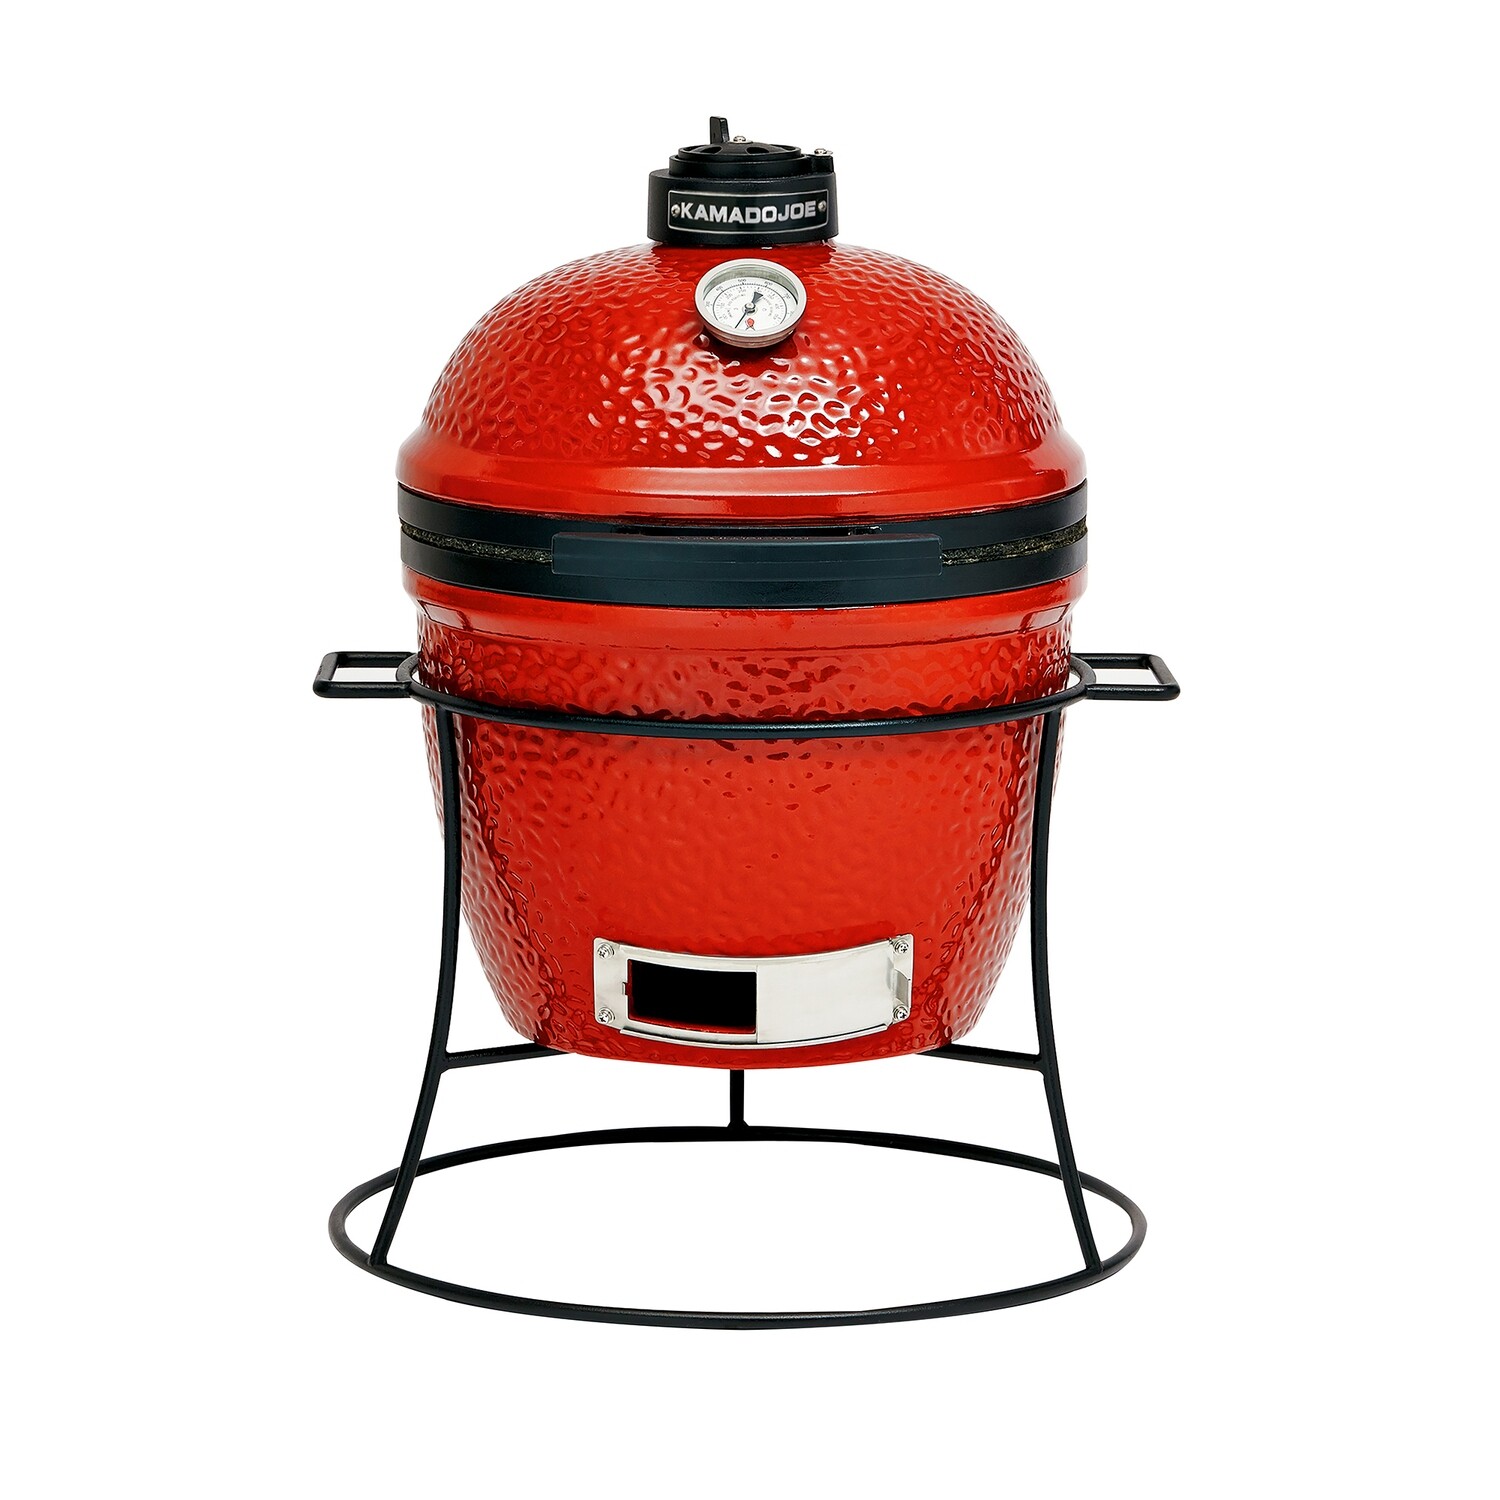 Kamado Joe® Joe Jr.™ 13.5- inch Portable Charcoal Grill in Red with Cast Iron Stand, Heat Deflector and Ash Tool